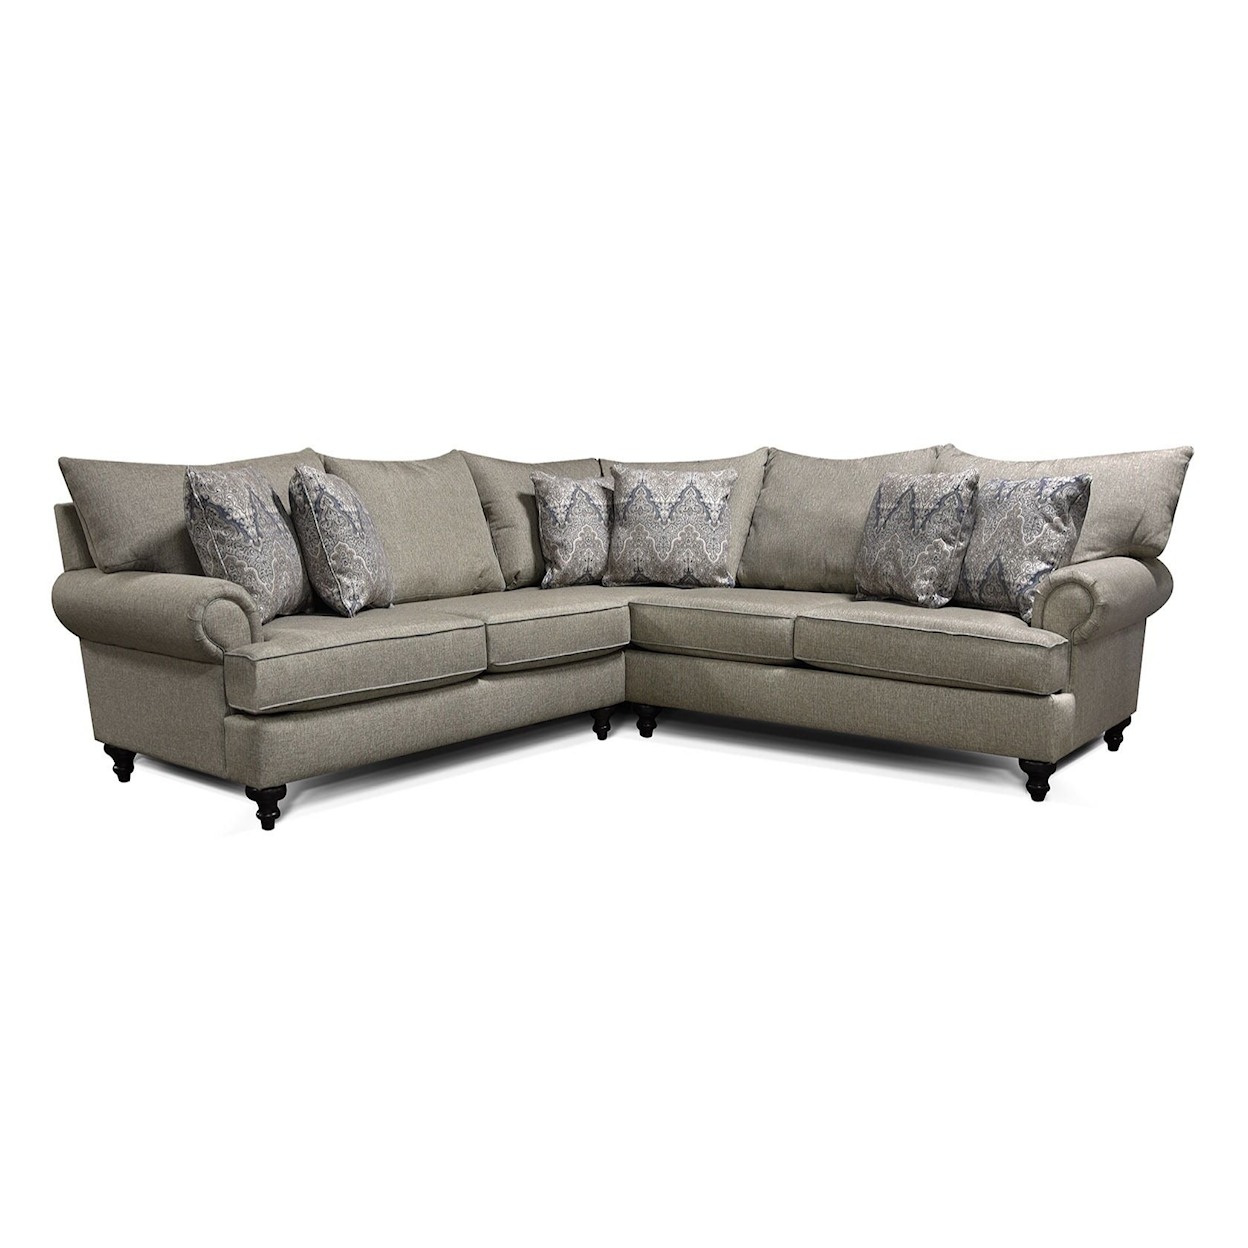 England 4Y00/N Series 2-Piece Sectional Sofa